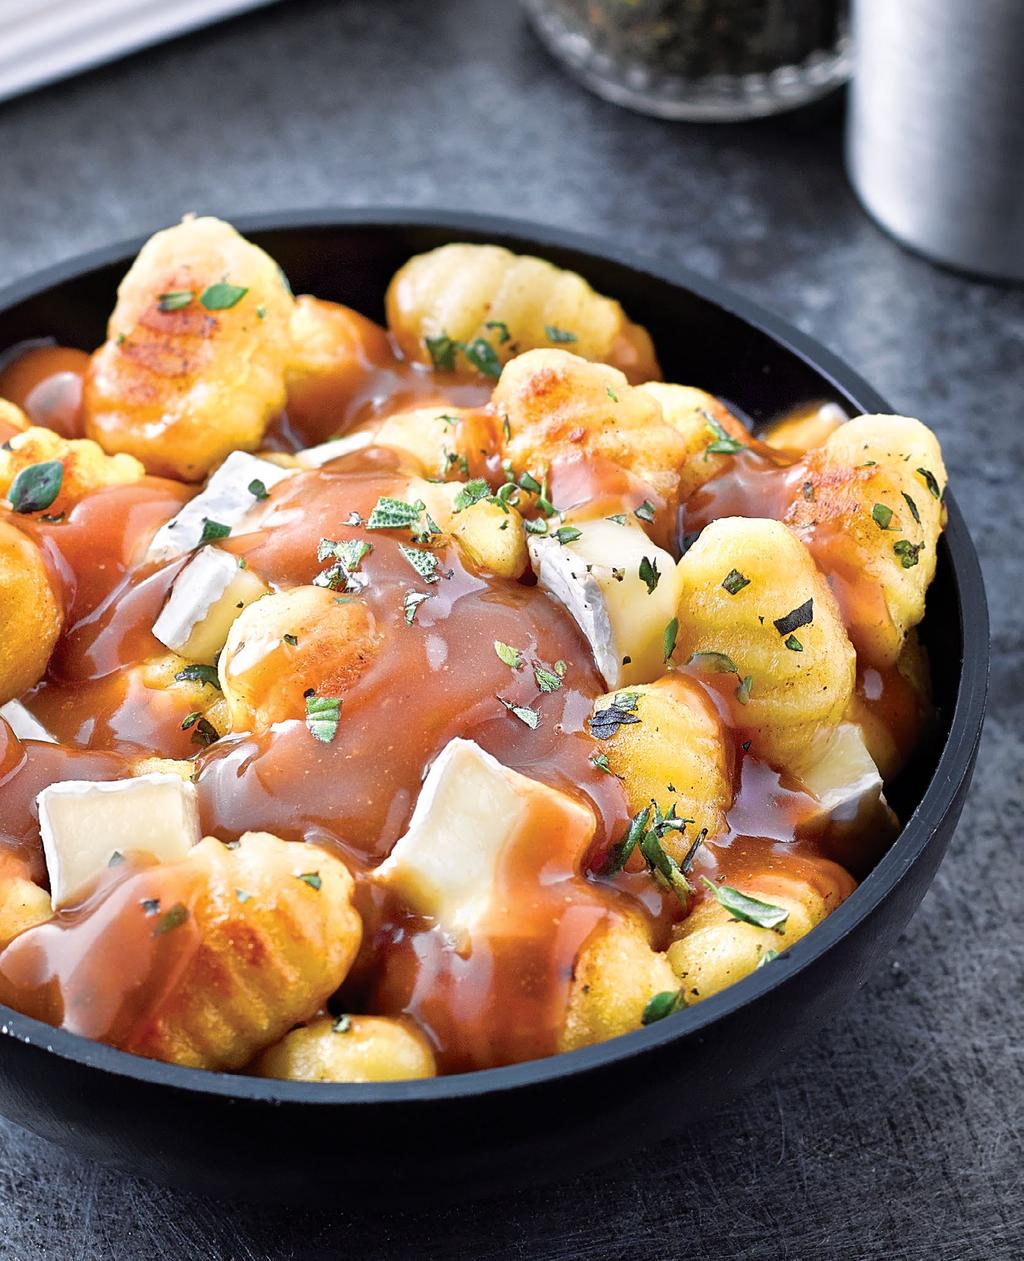 Gnocchi and Gravy ITALY MEETS QUEBEC We think of this idea as sort of the upscale Italian cousin of a classic poutine.